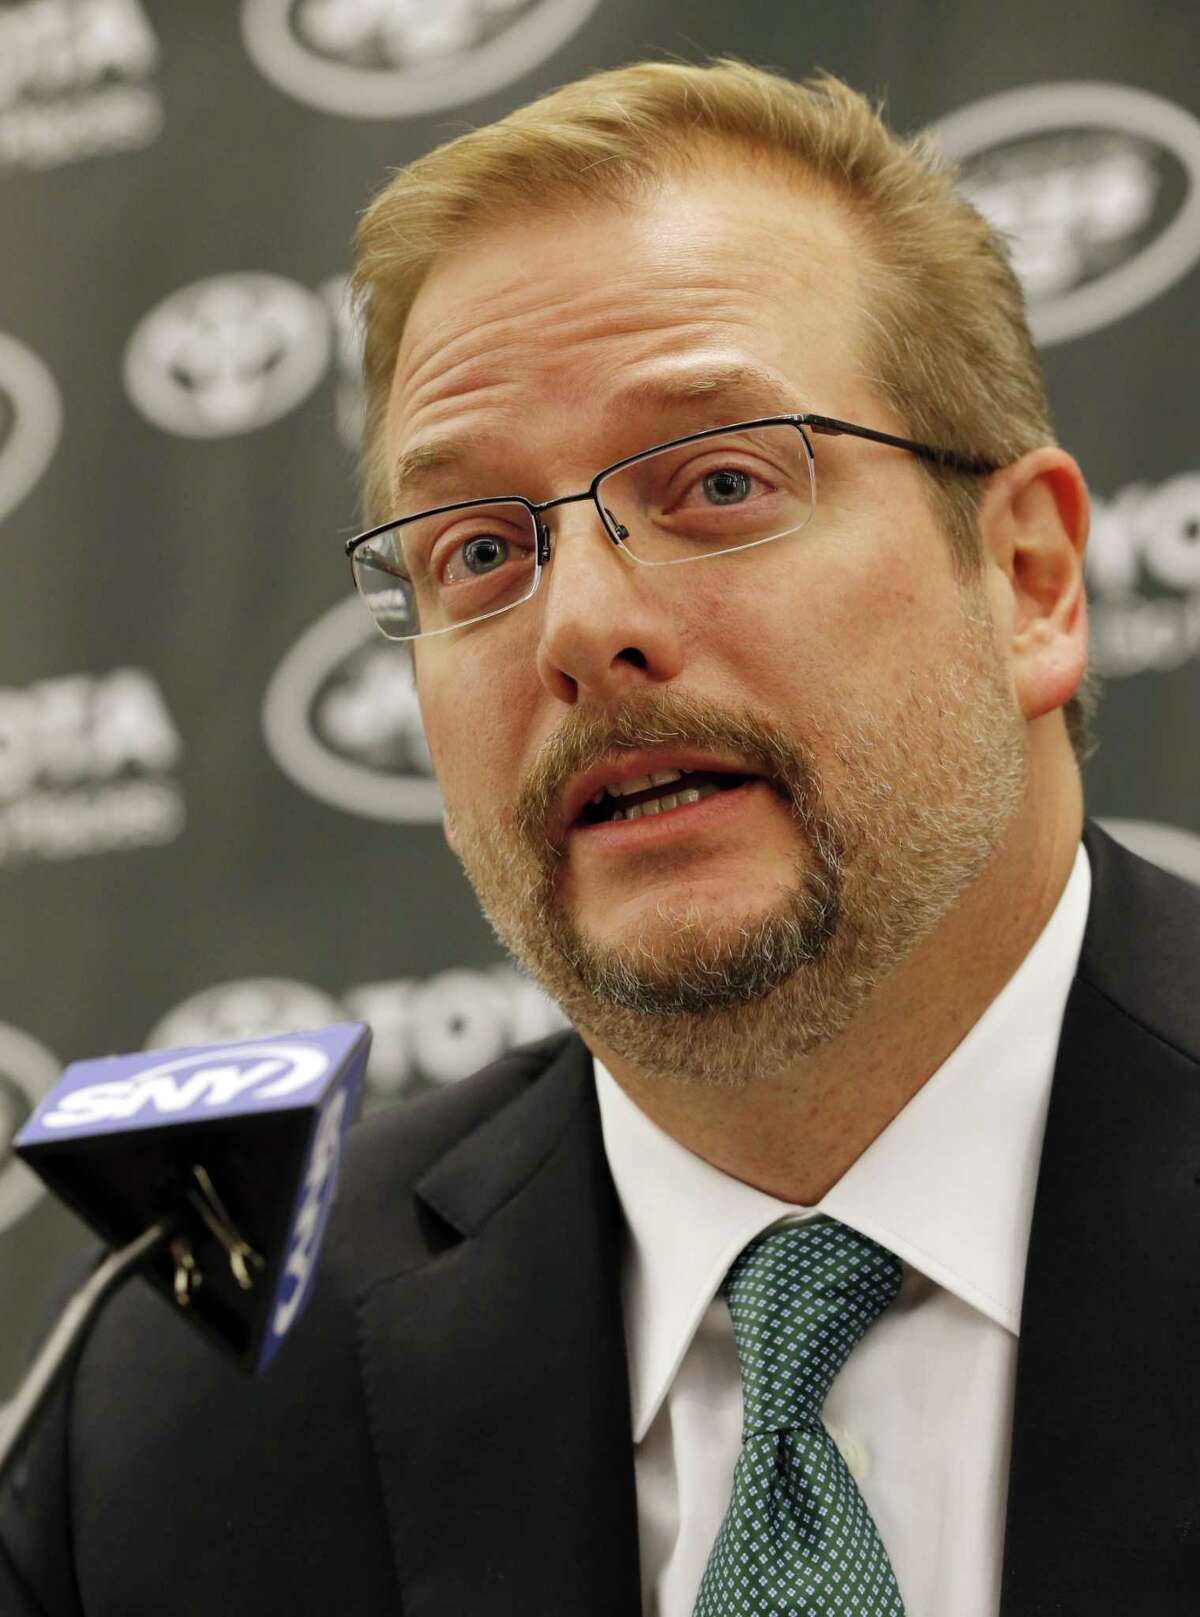 New York Jets general manager Mike Maccagnan speaks during a press conference on Jan. 21 in Florham Park, N.J.